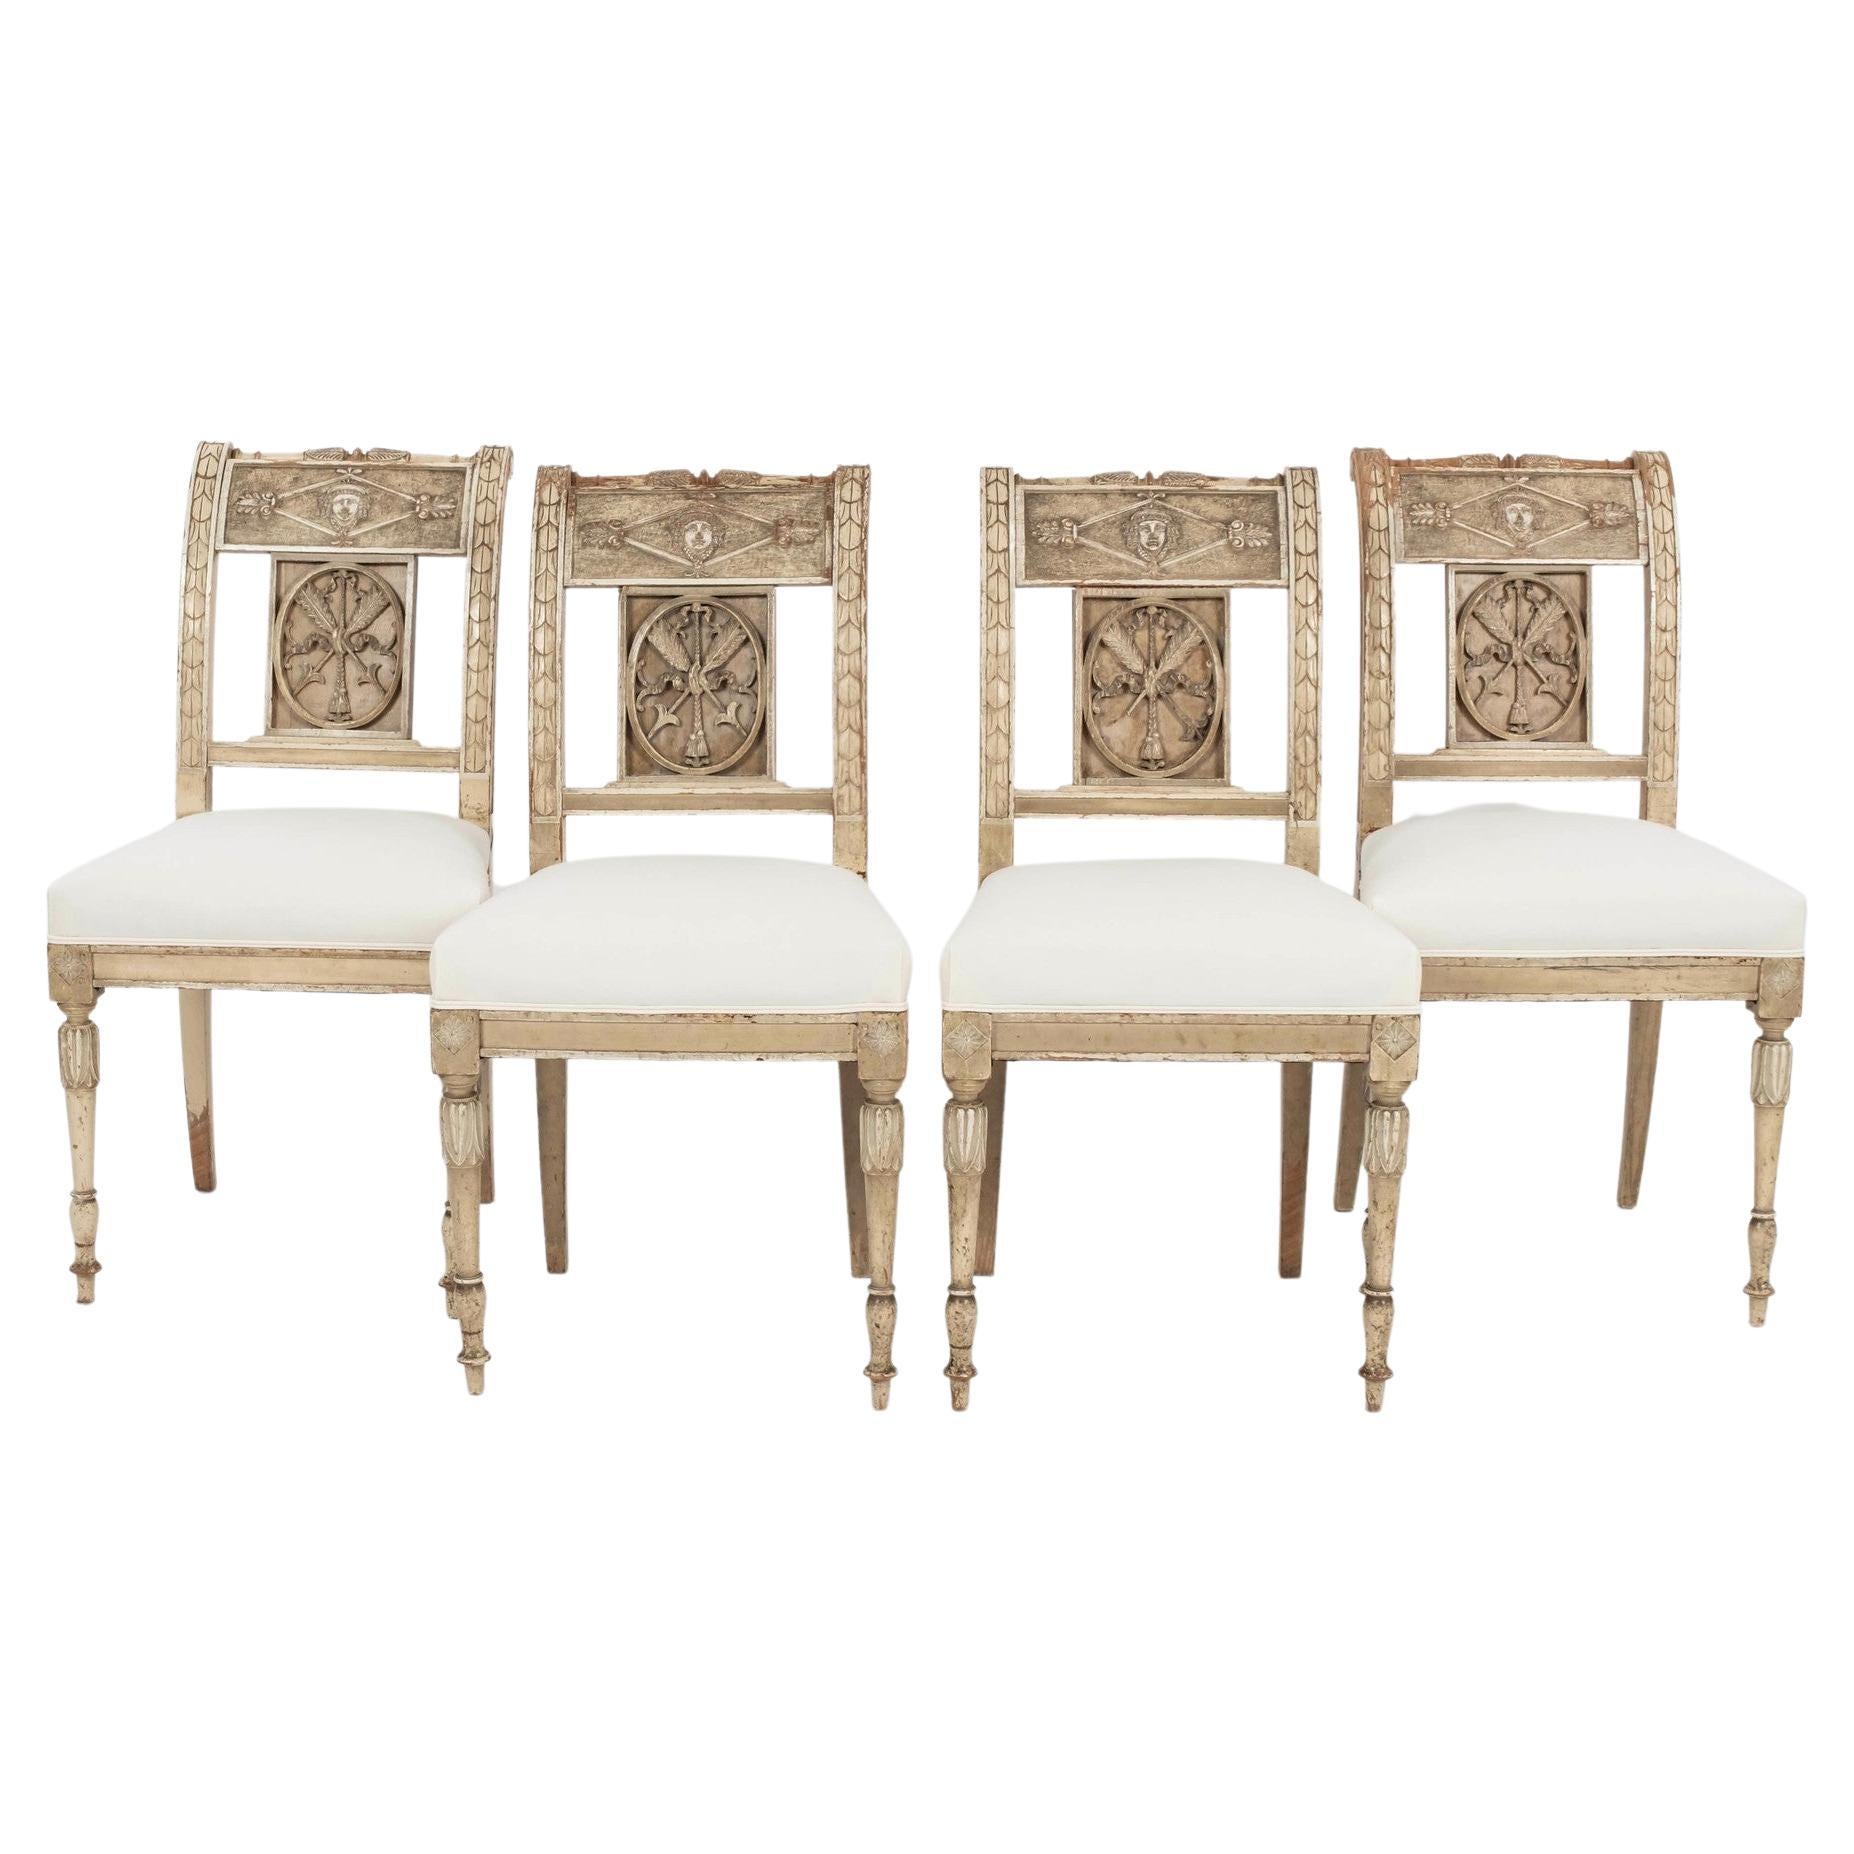 Set of Four 18th Century Neoclassical Gustavian Chairs